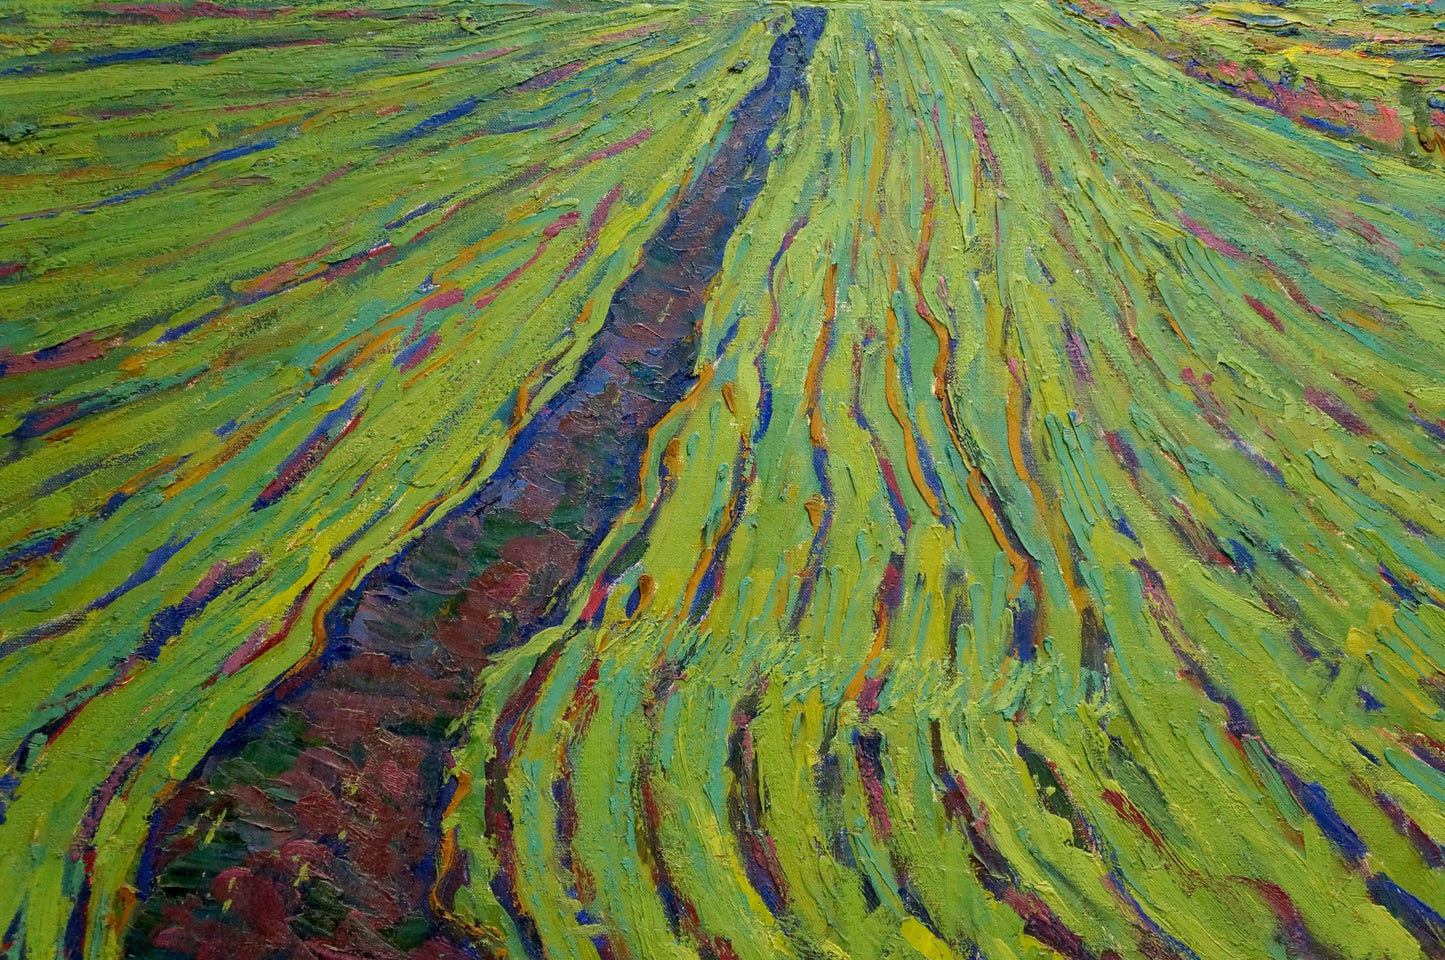 Oil artwork featuring "Fields" by Dmitry Andreevich Chvala